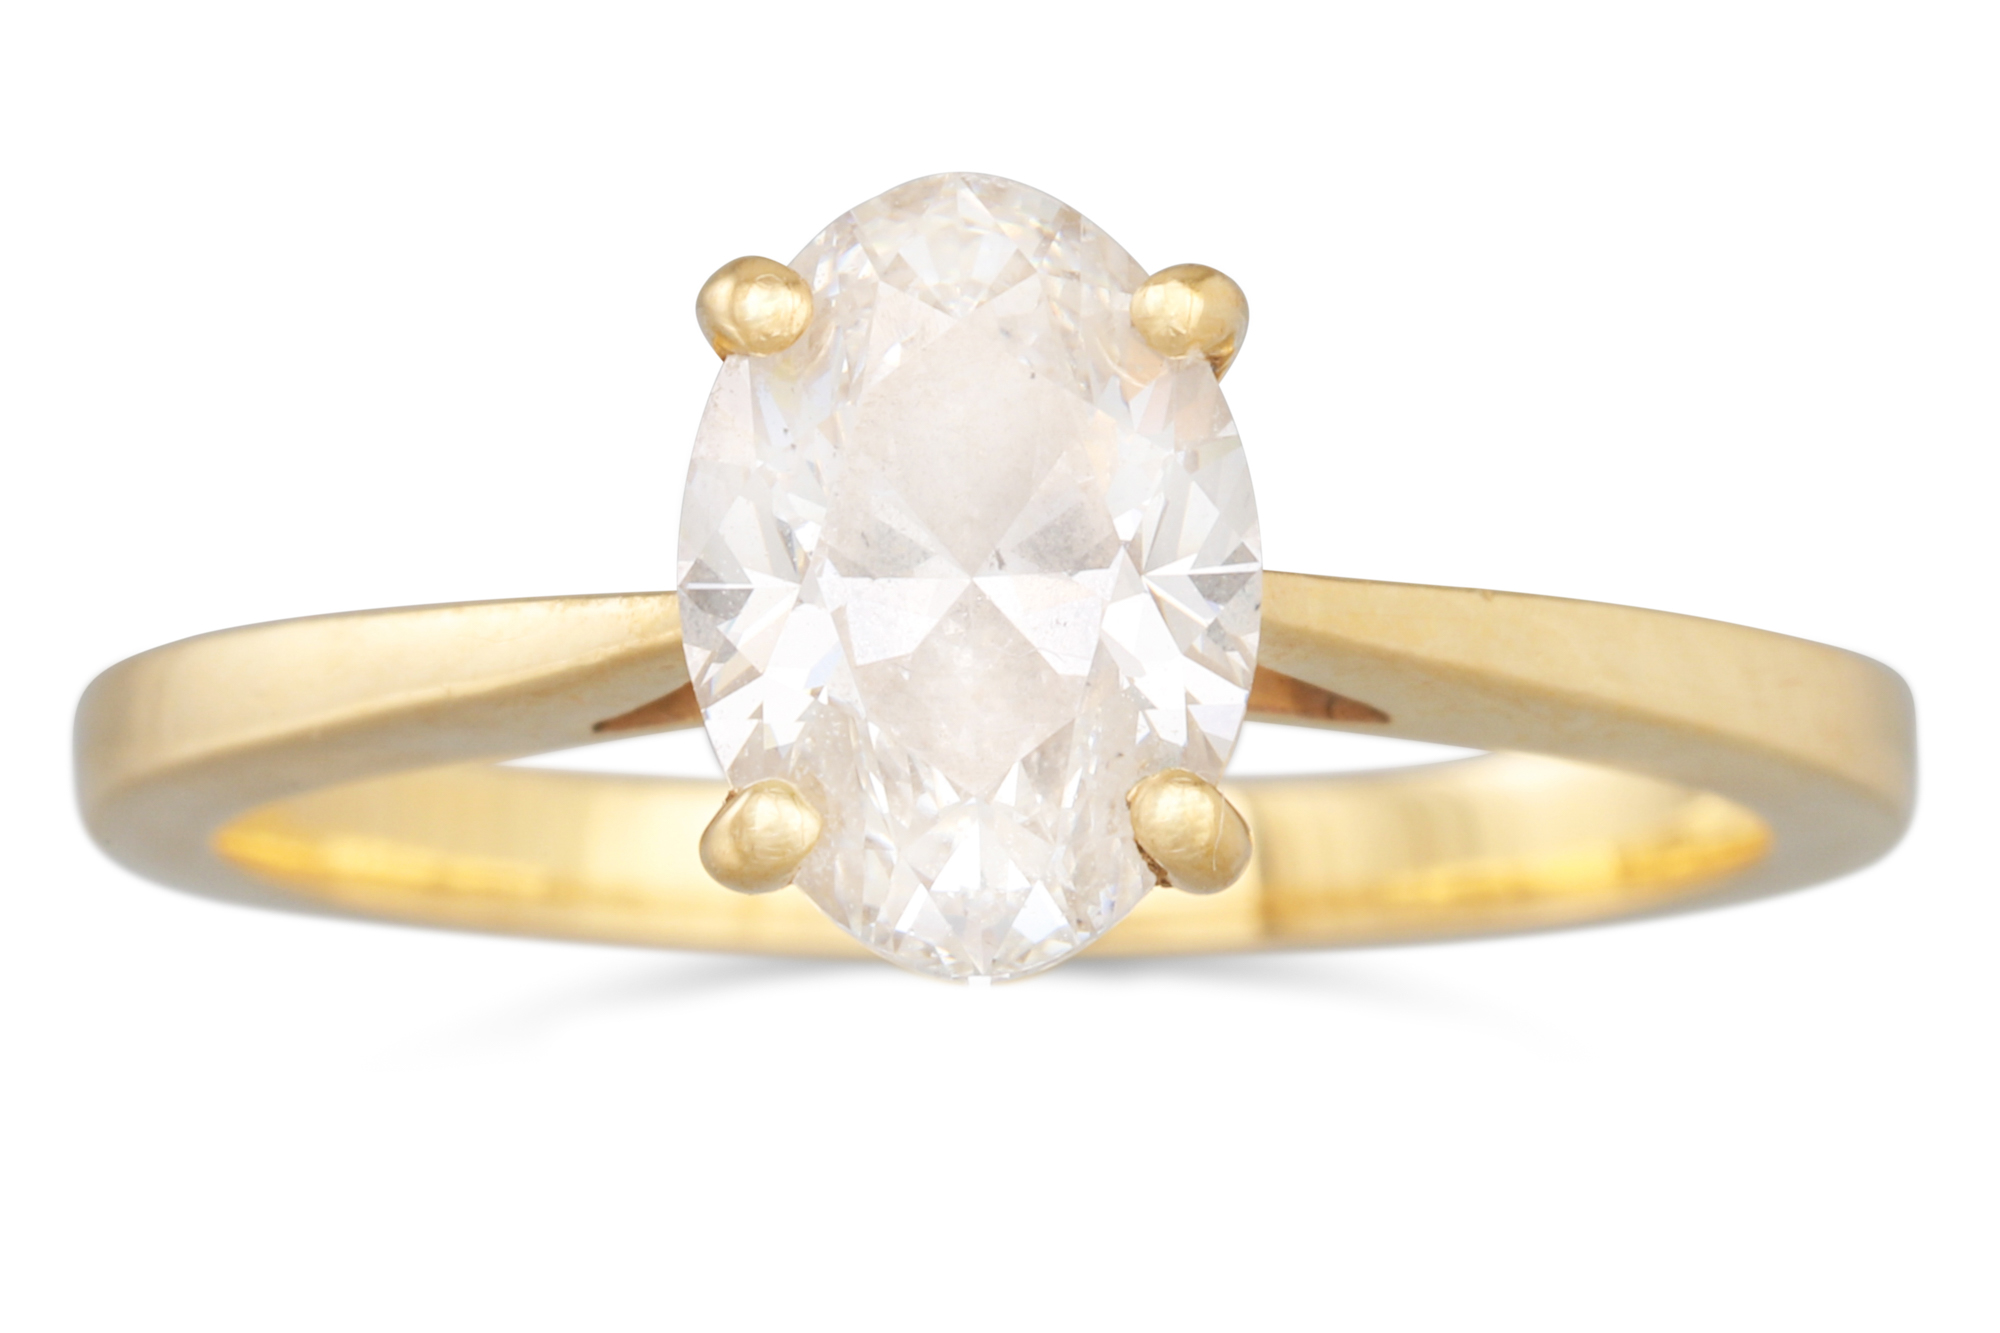 AN OVAL DIAMOND SOLITAIRE RING, the oval diamond to a yellow gold band. Together with a GIA Cert.